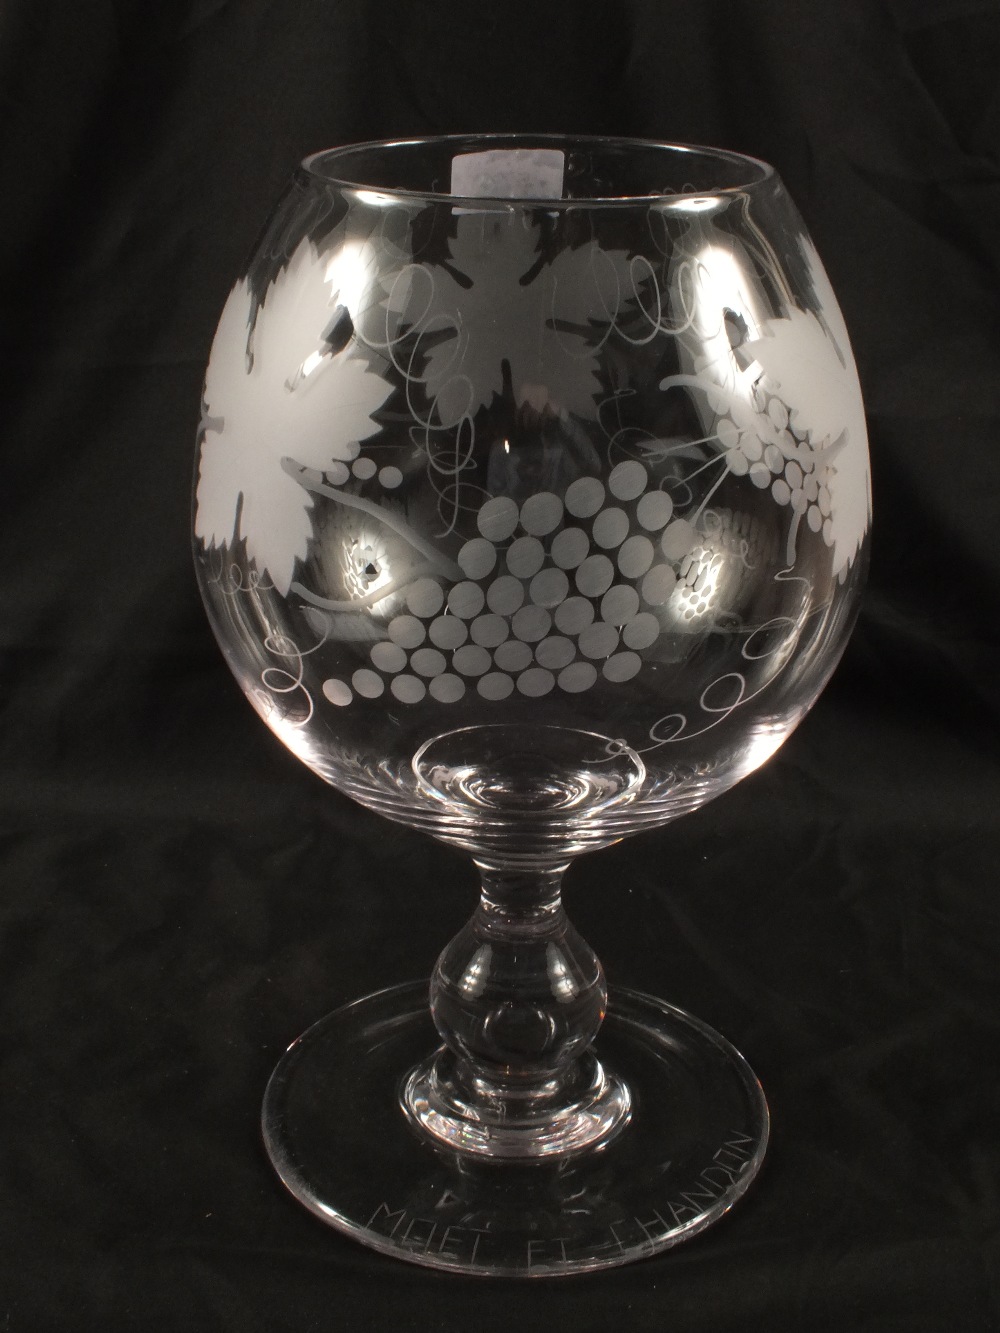 A large Moet & Chandon brandy glass with etched vine leaf decoration, height 13"